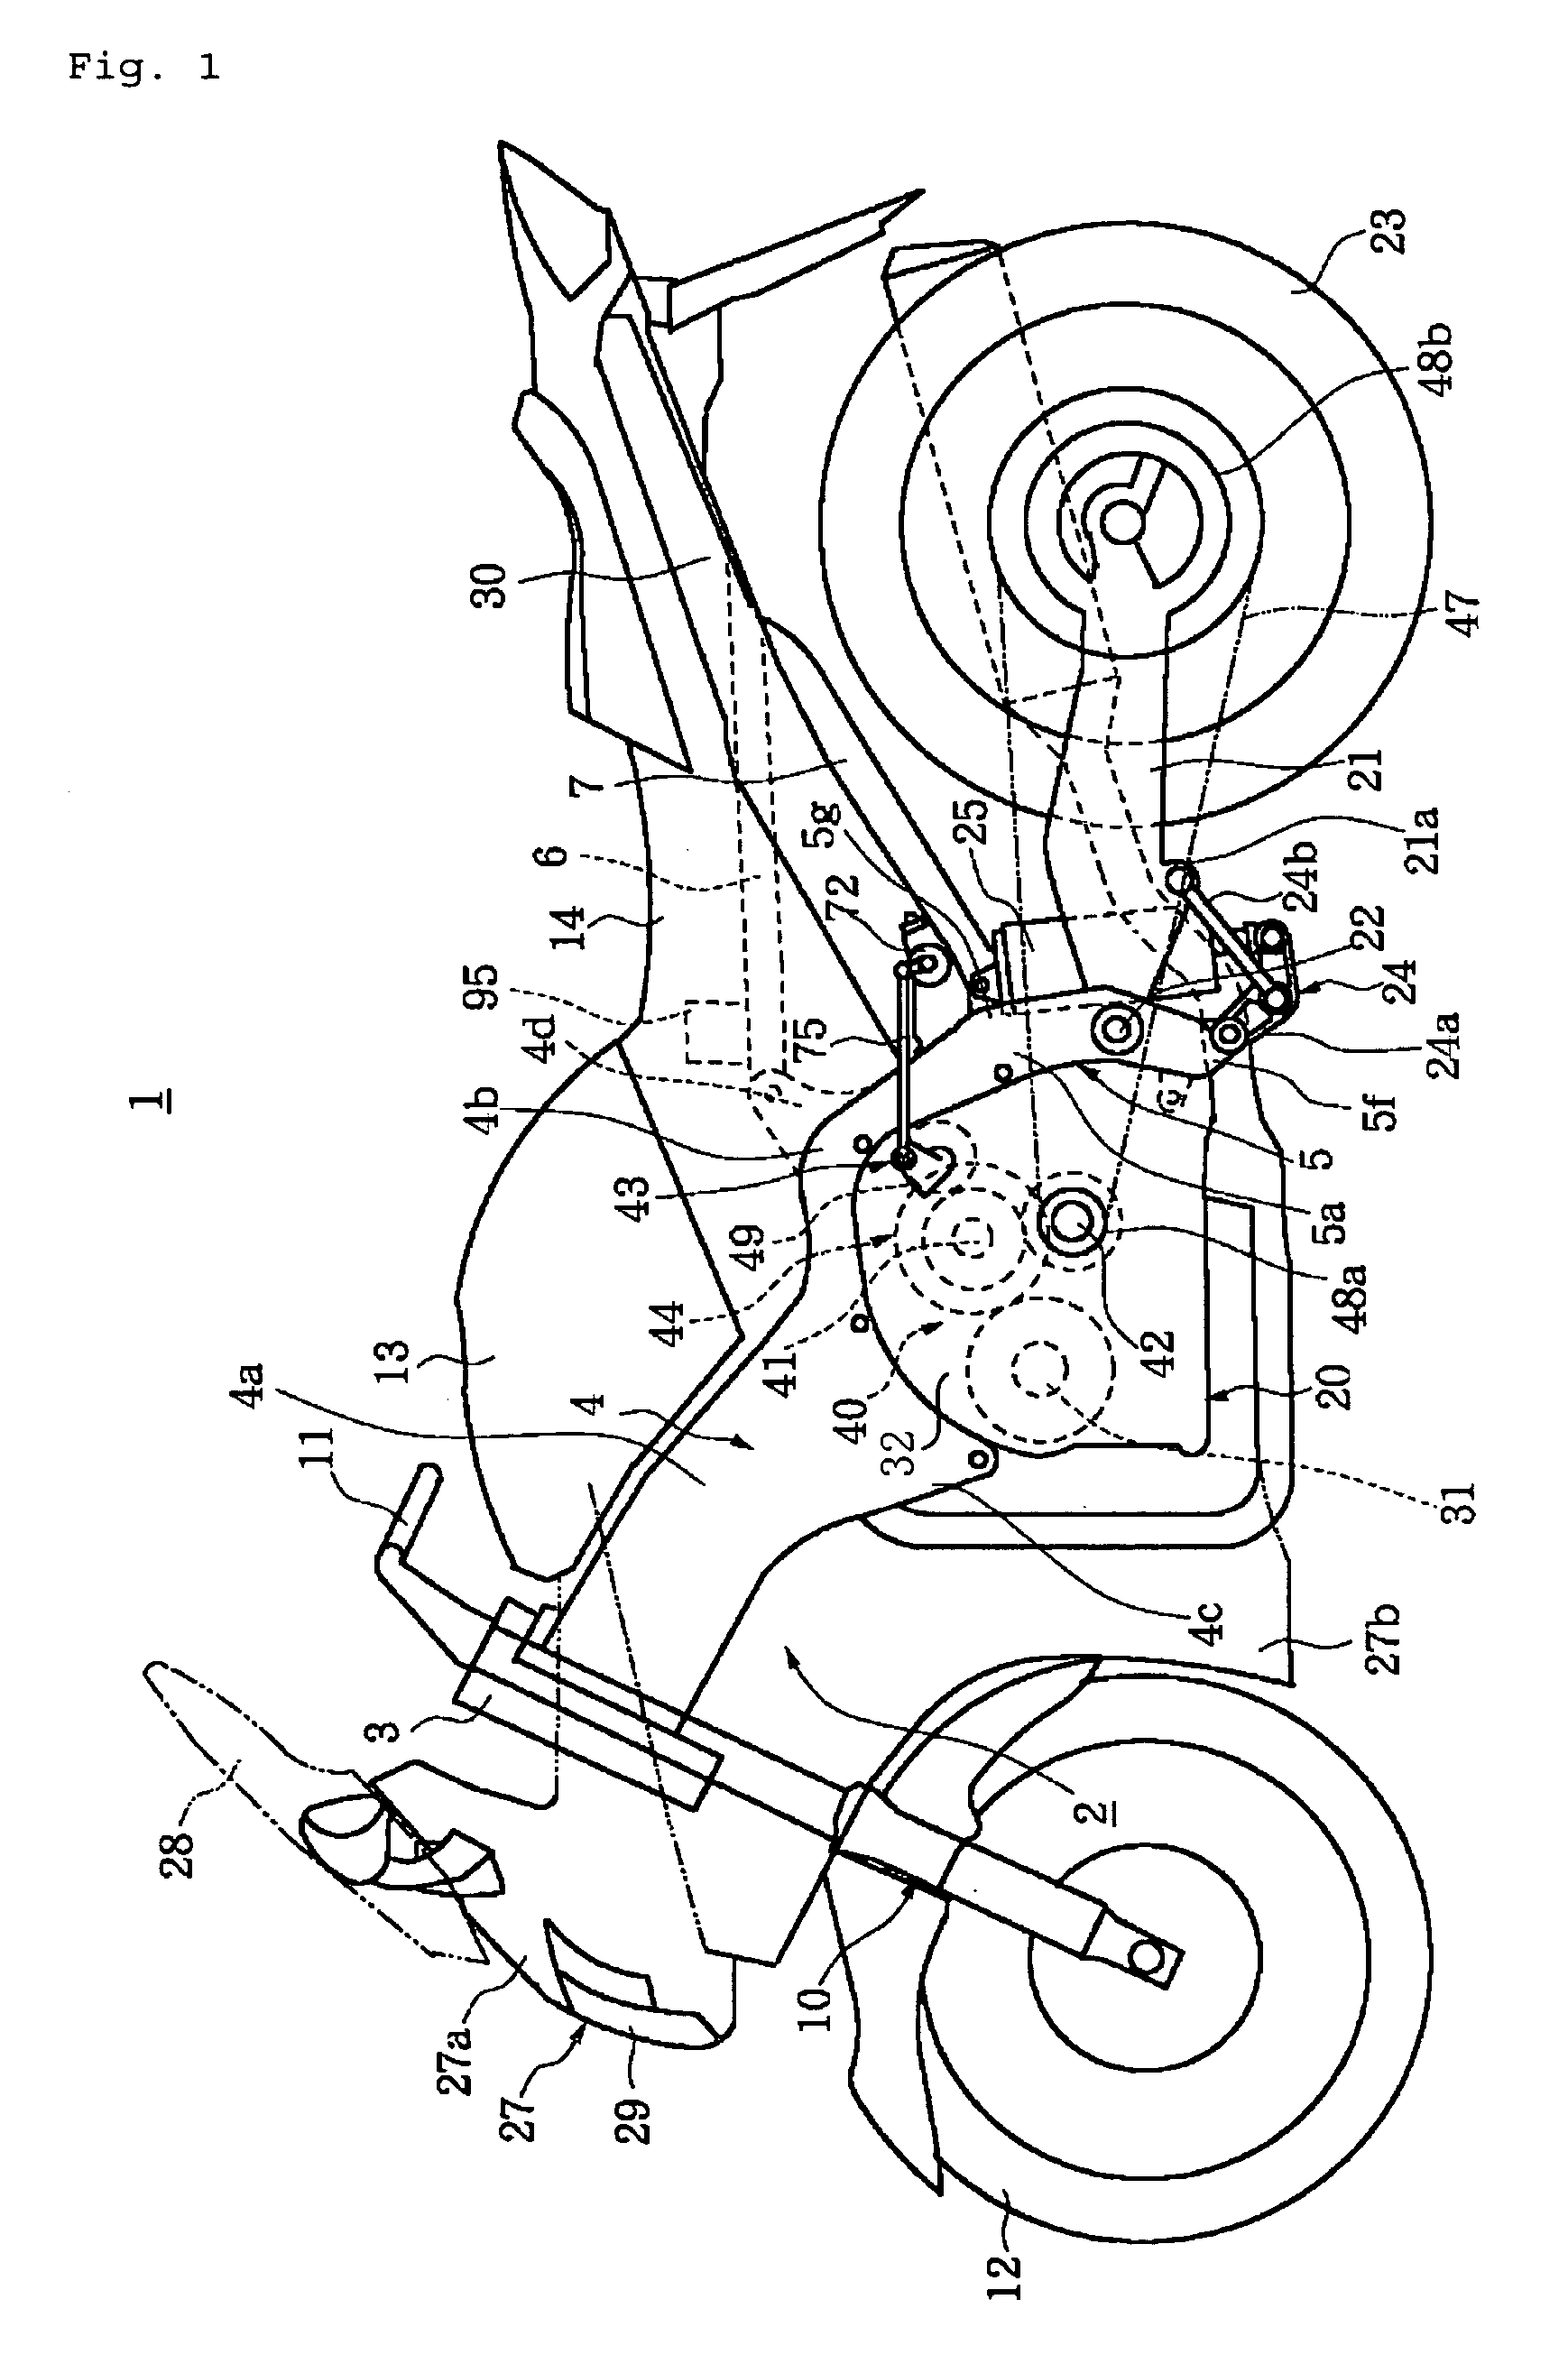 Automatic transmission for a motorcycle